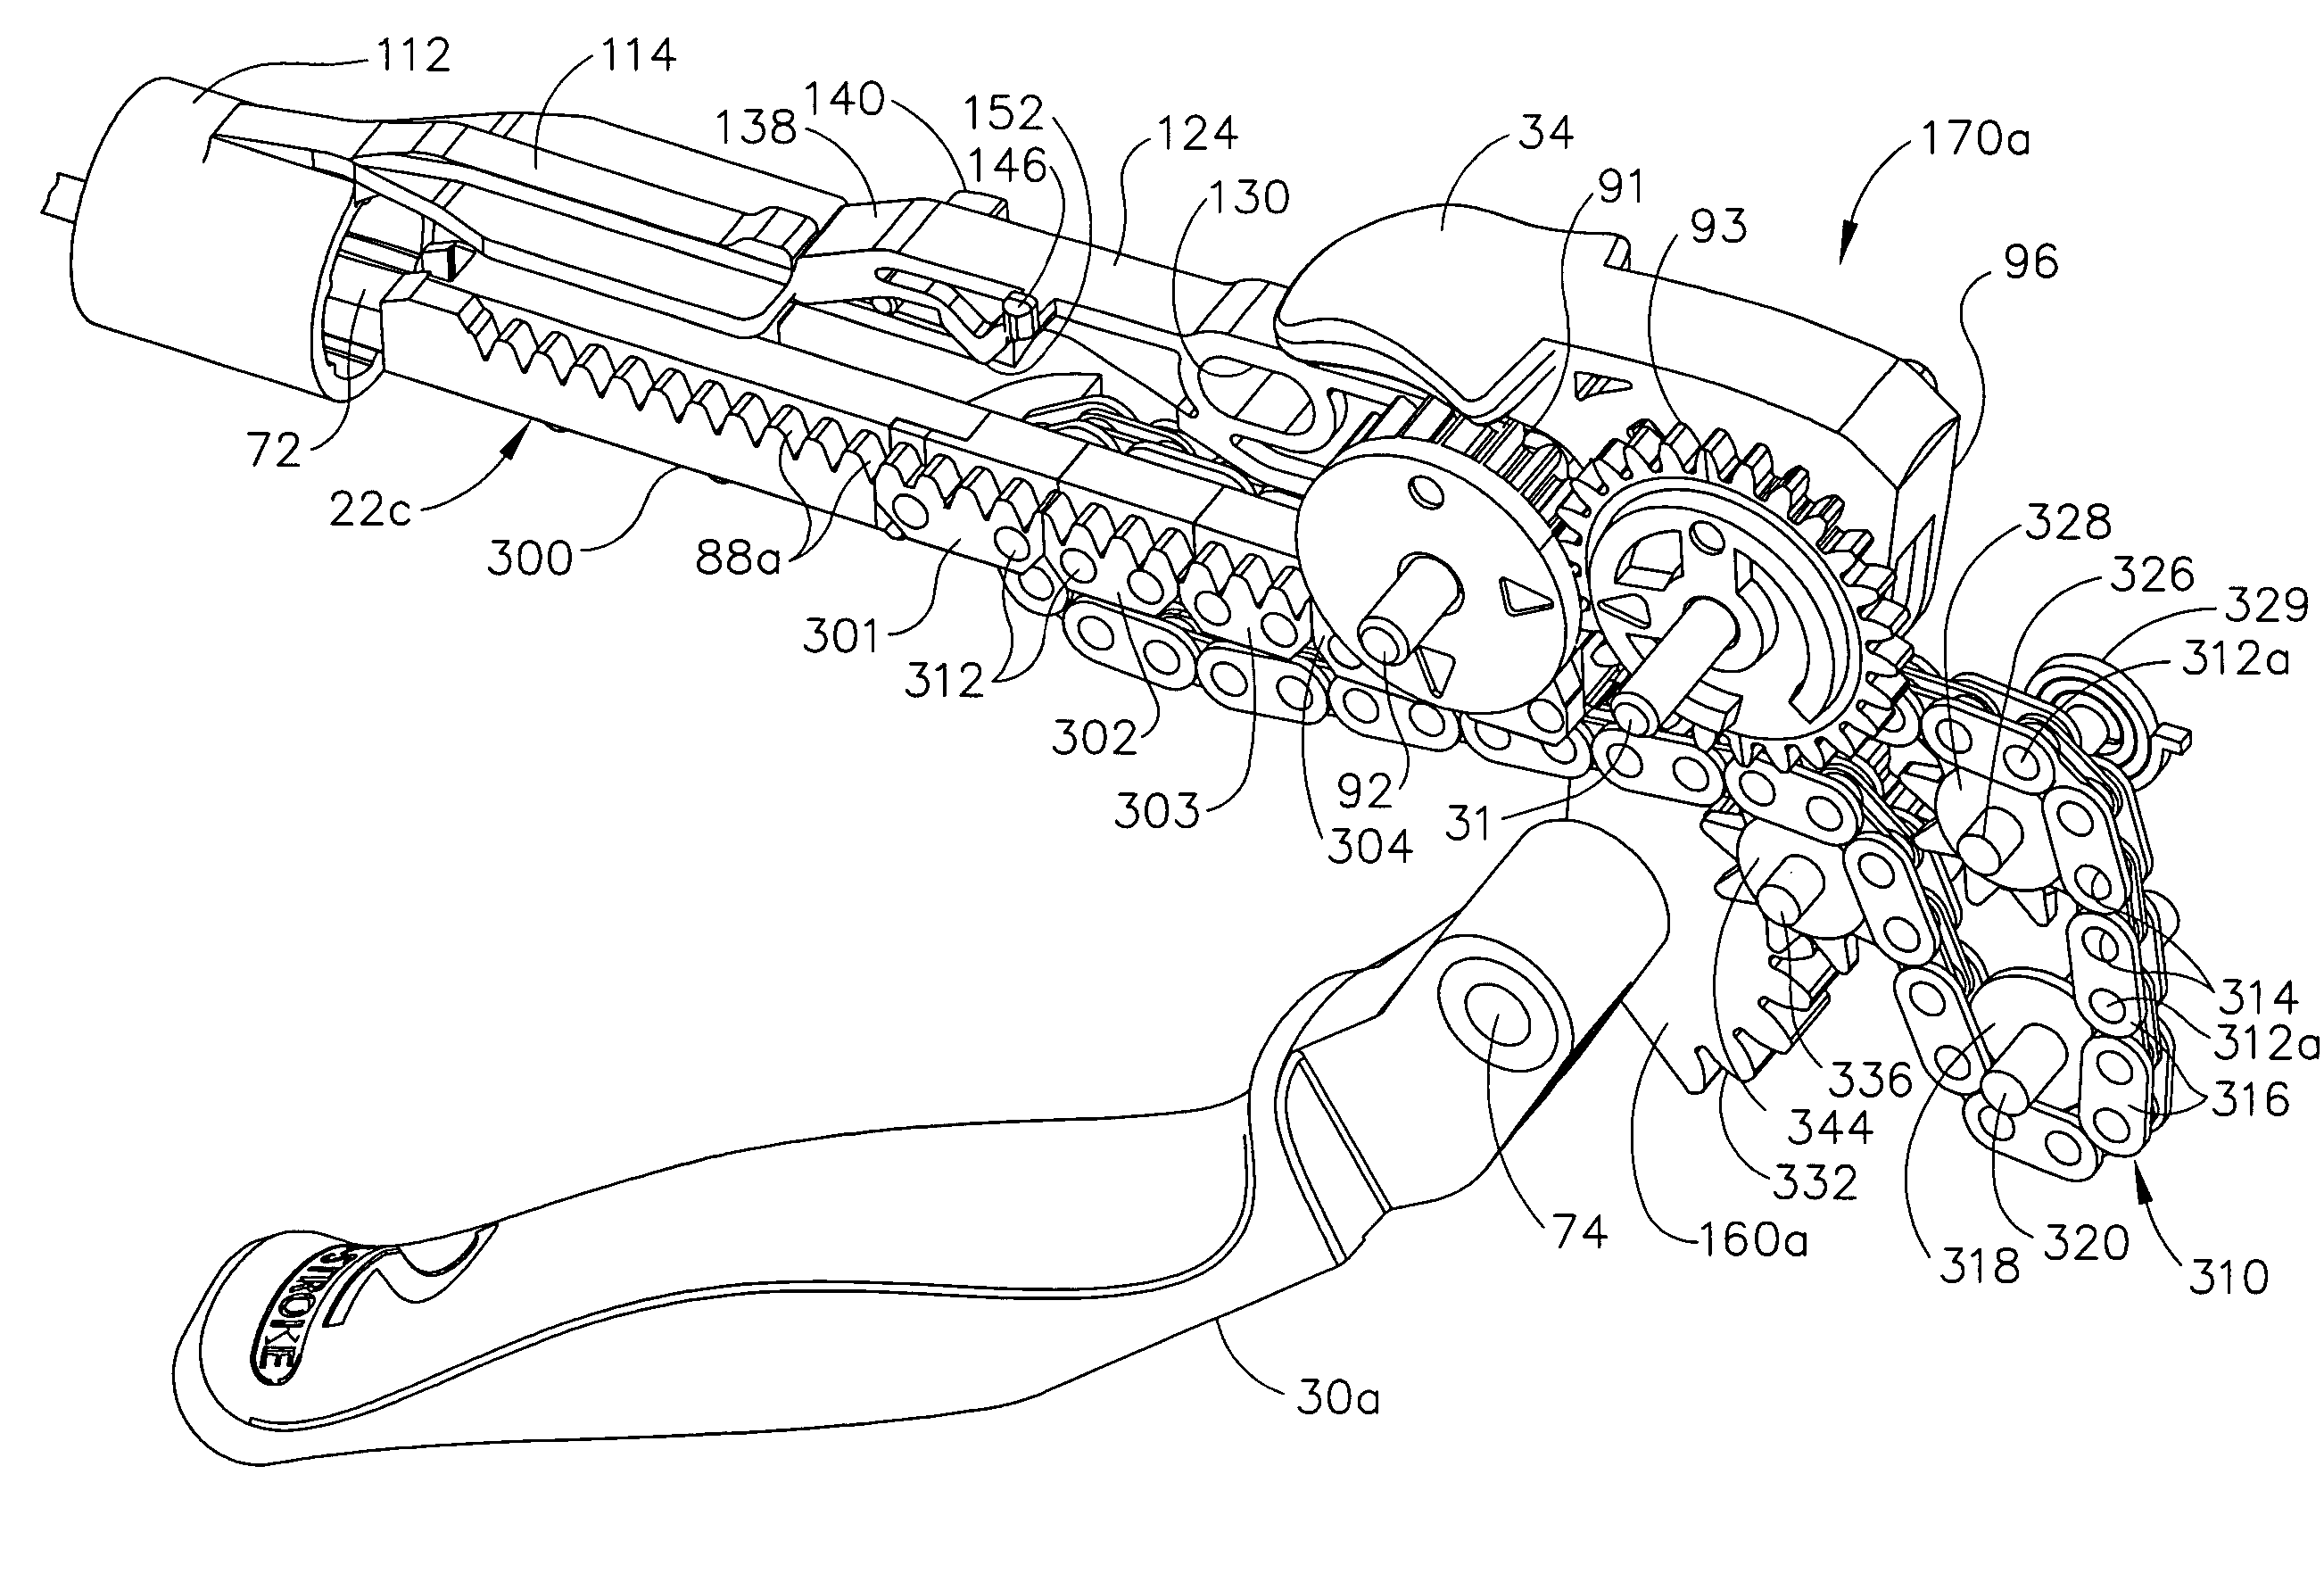 Surgical stapling instrument incorporating a multi-stroke firing mechanism with a flexible rack